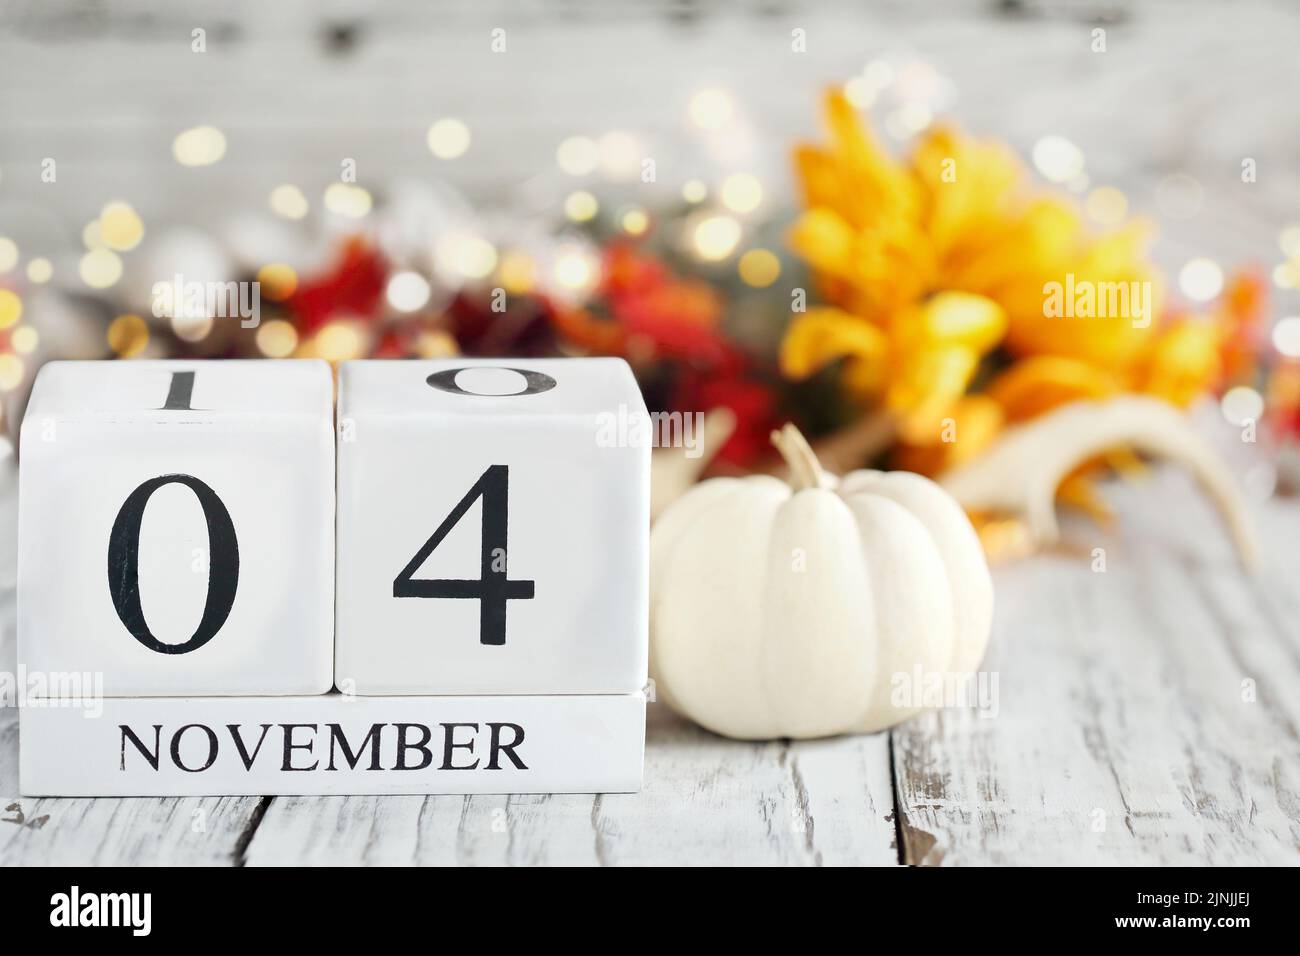 White wood calendar blocks with the date November 4th and autumn decorations over a wooden table. Selective focus with blurred background. Stock Photo